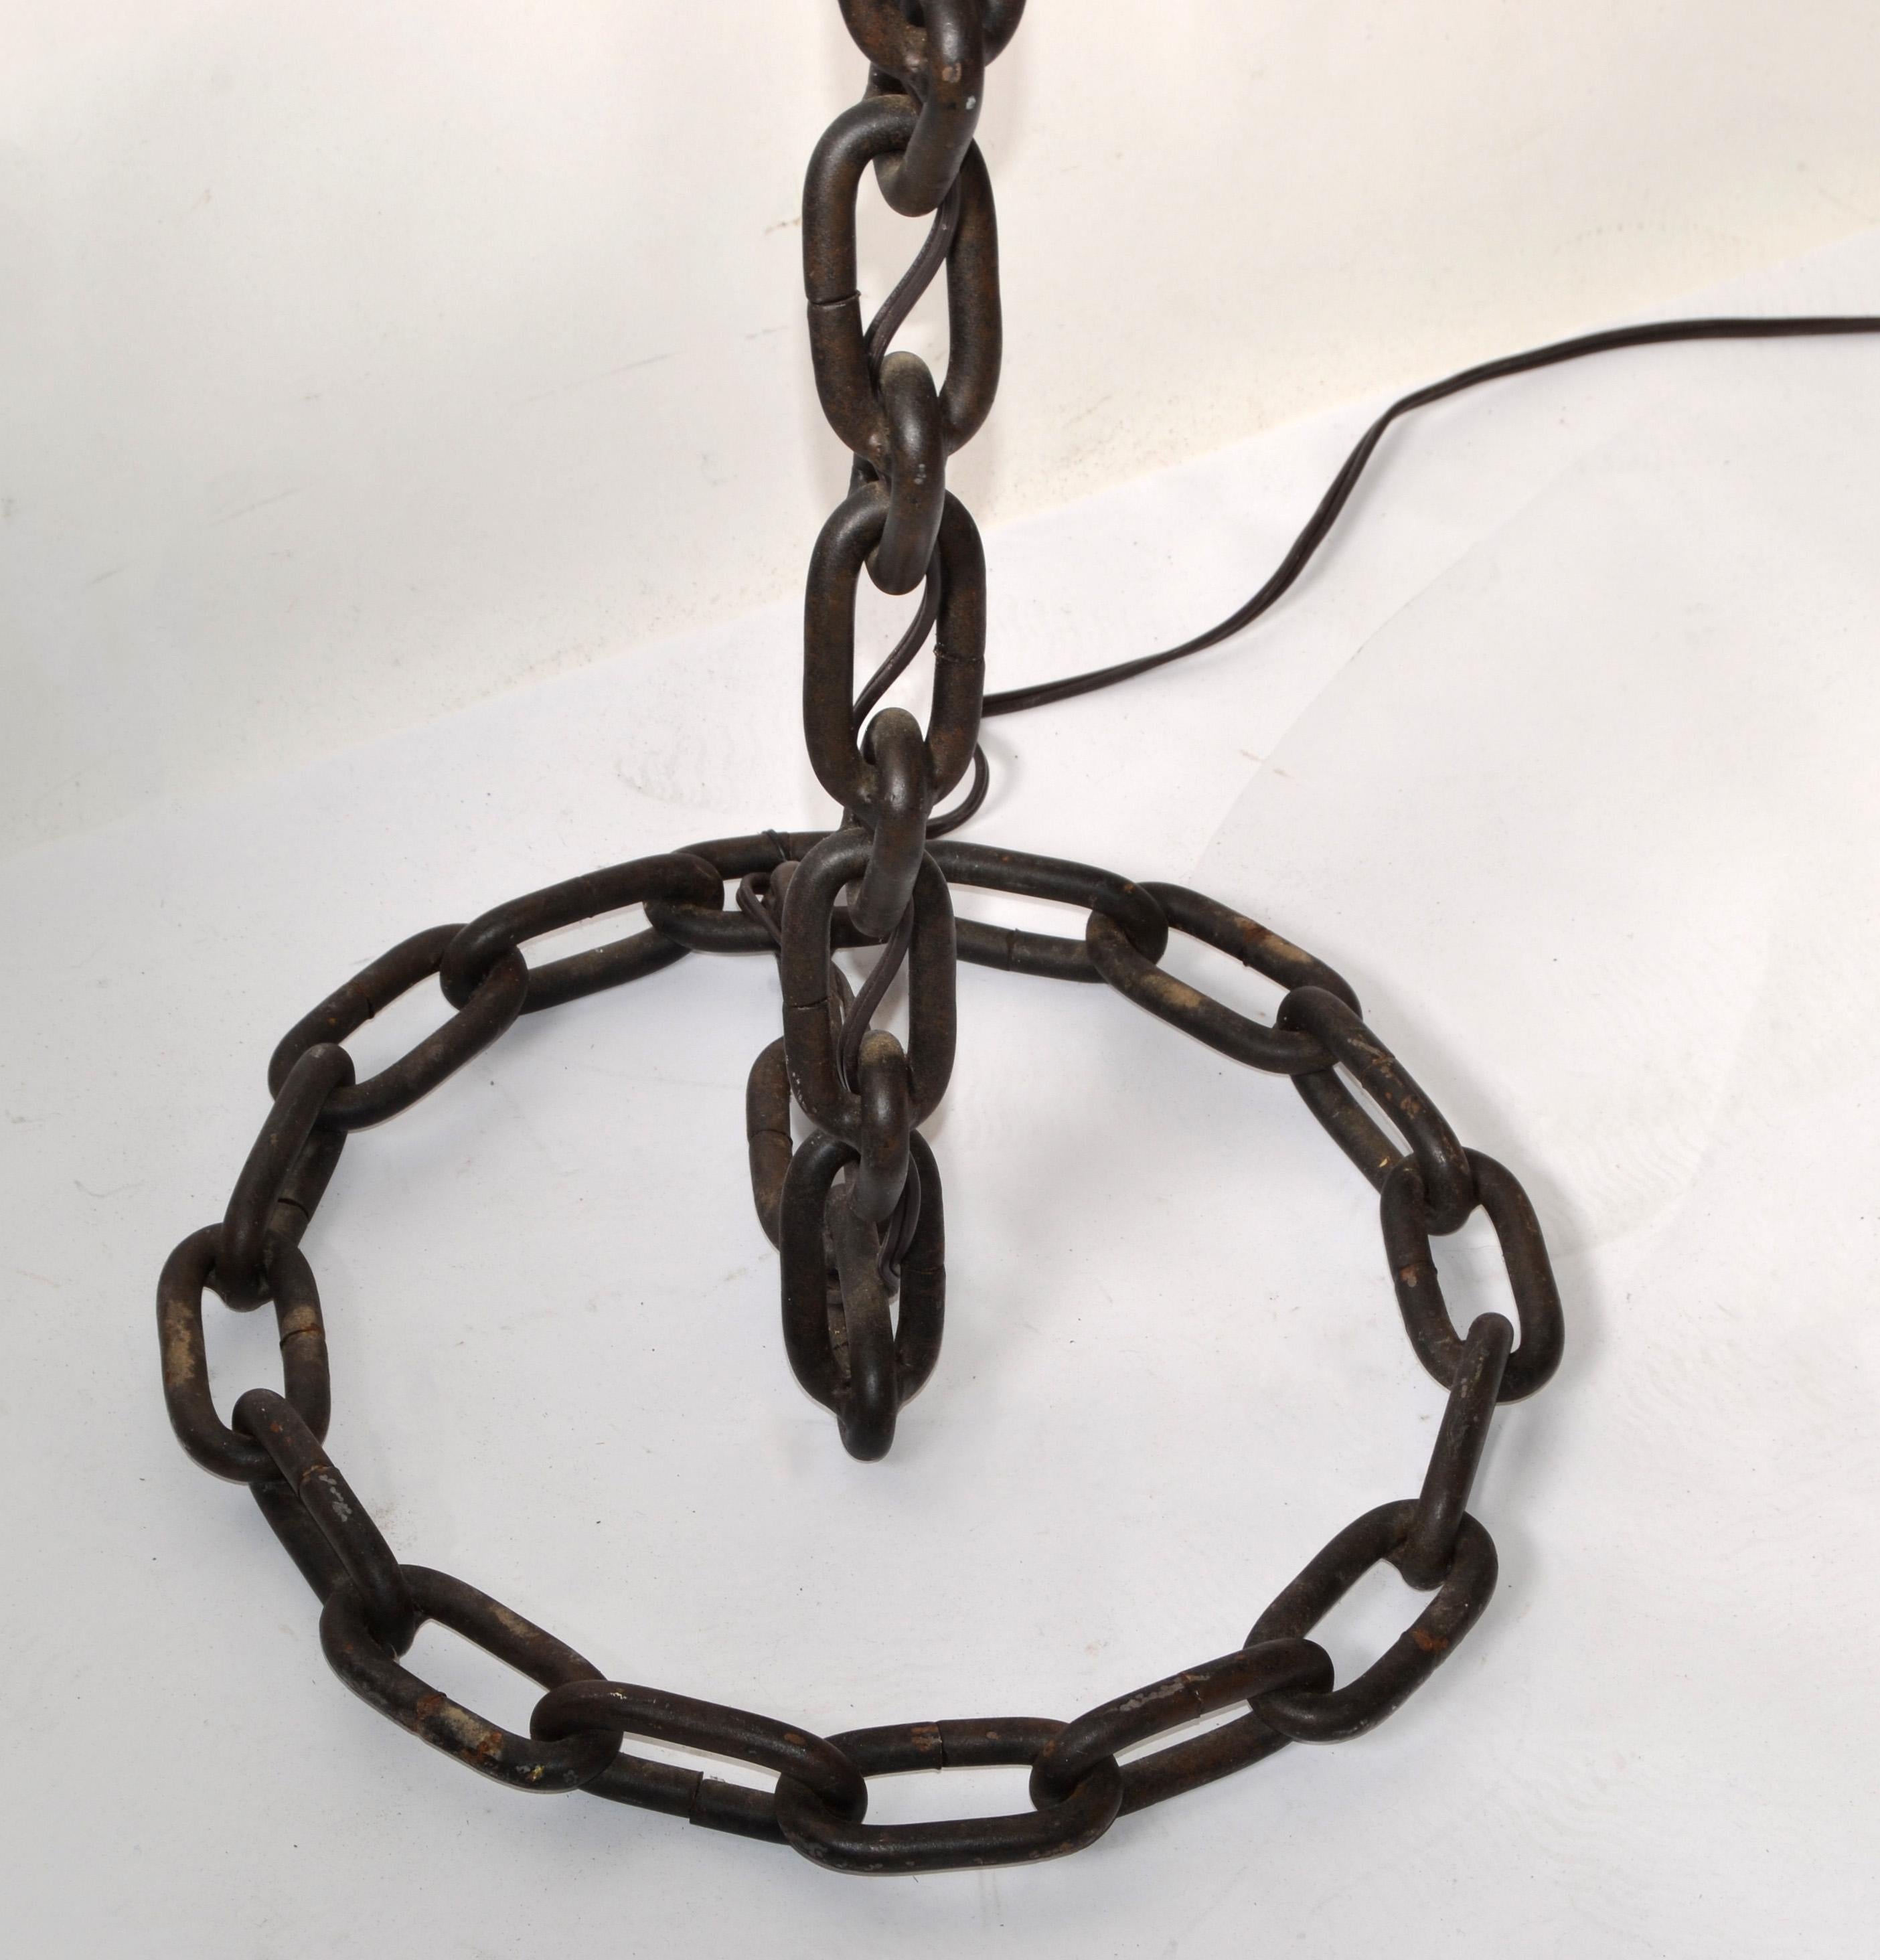 1970s French Brutalist Rustic Vintage Iron Chain Link Floor Lamp Round Base West 1